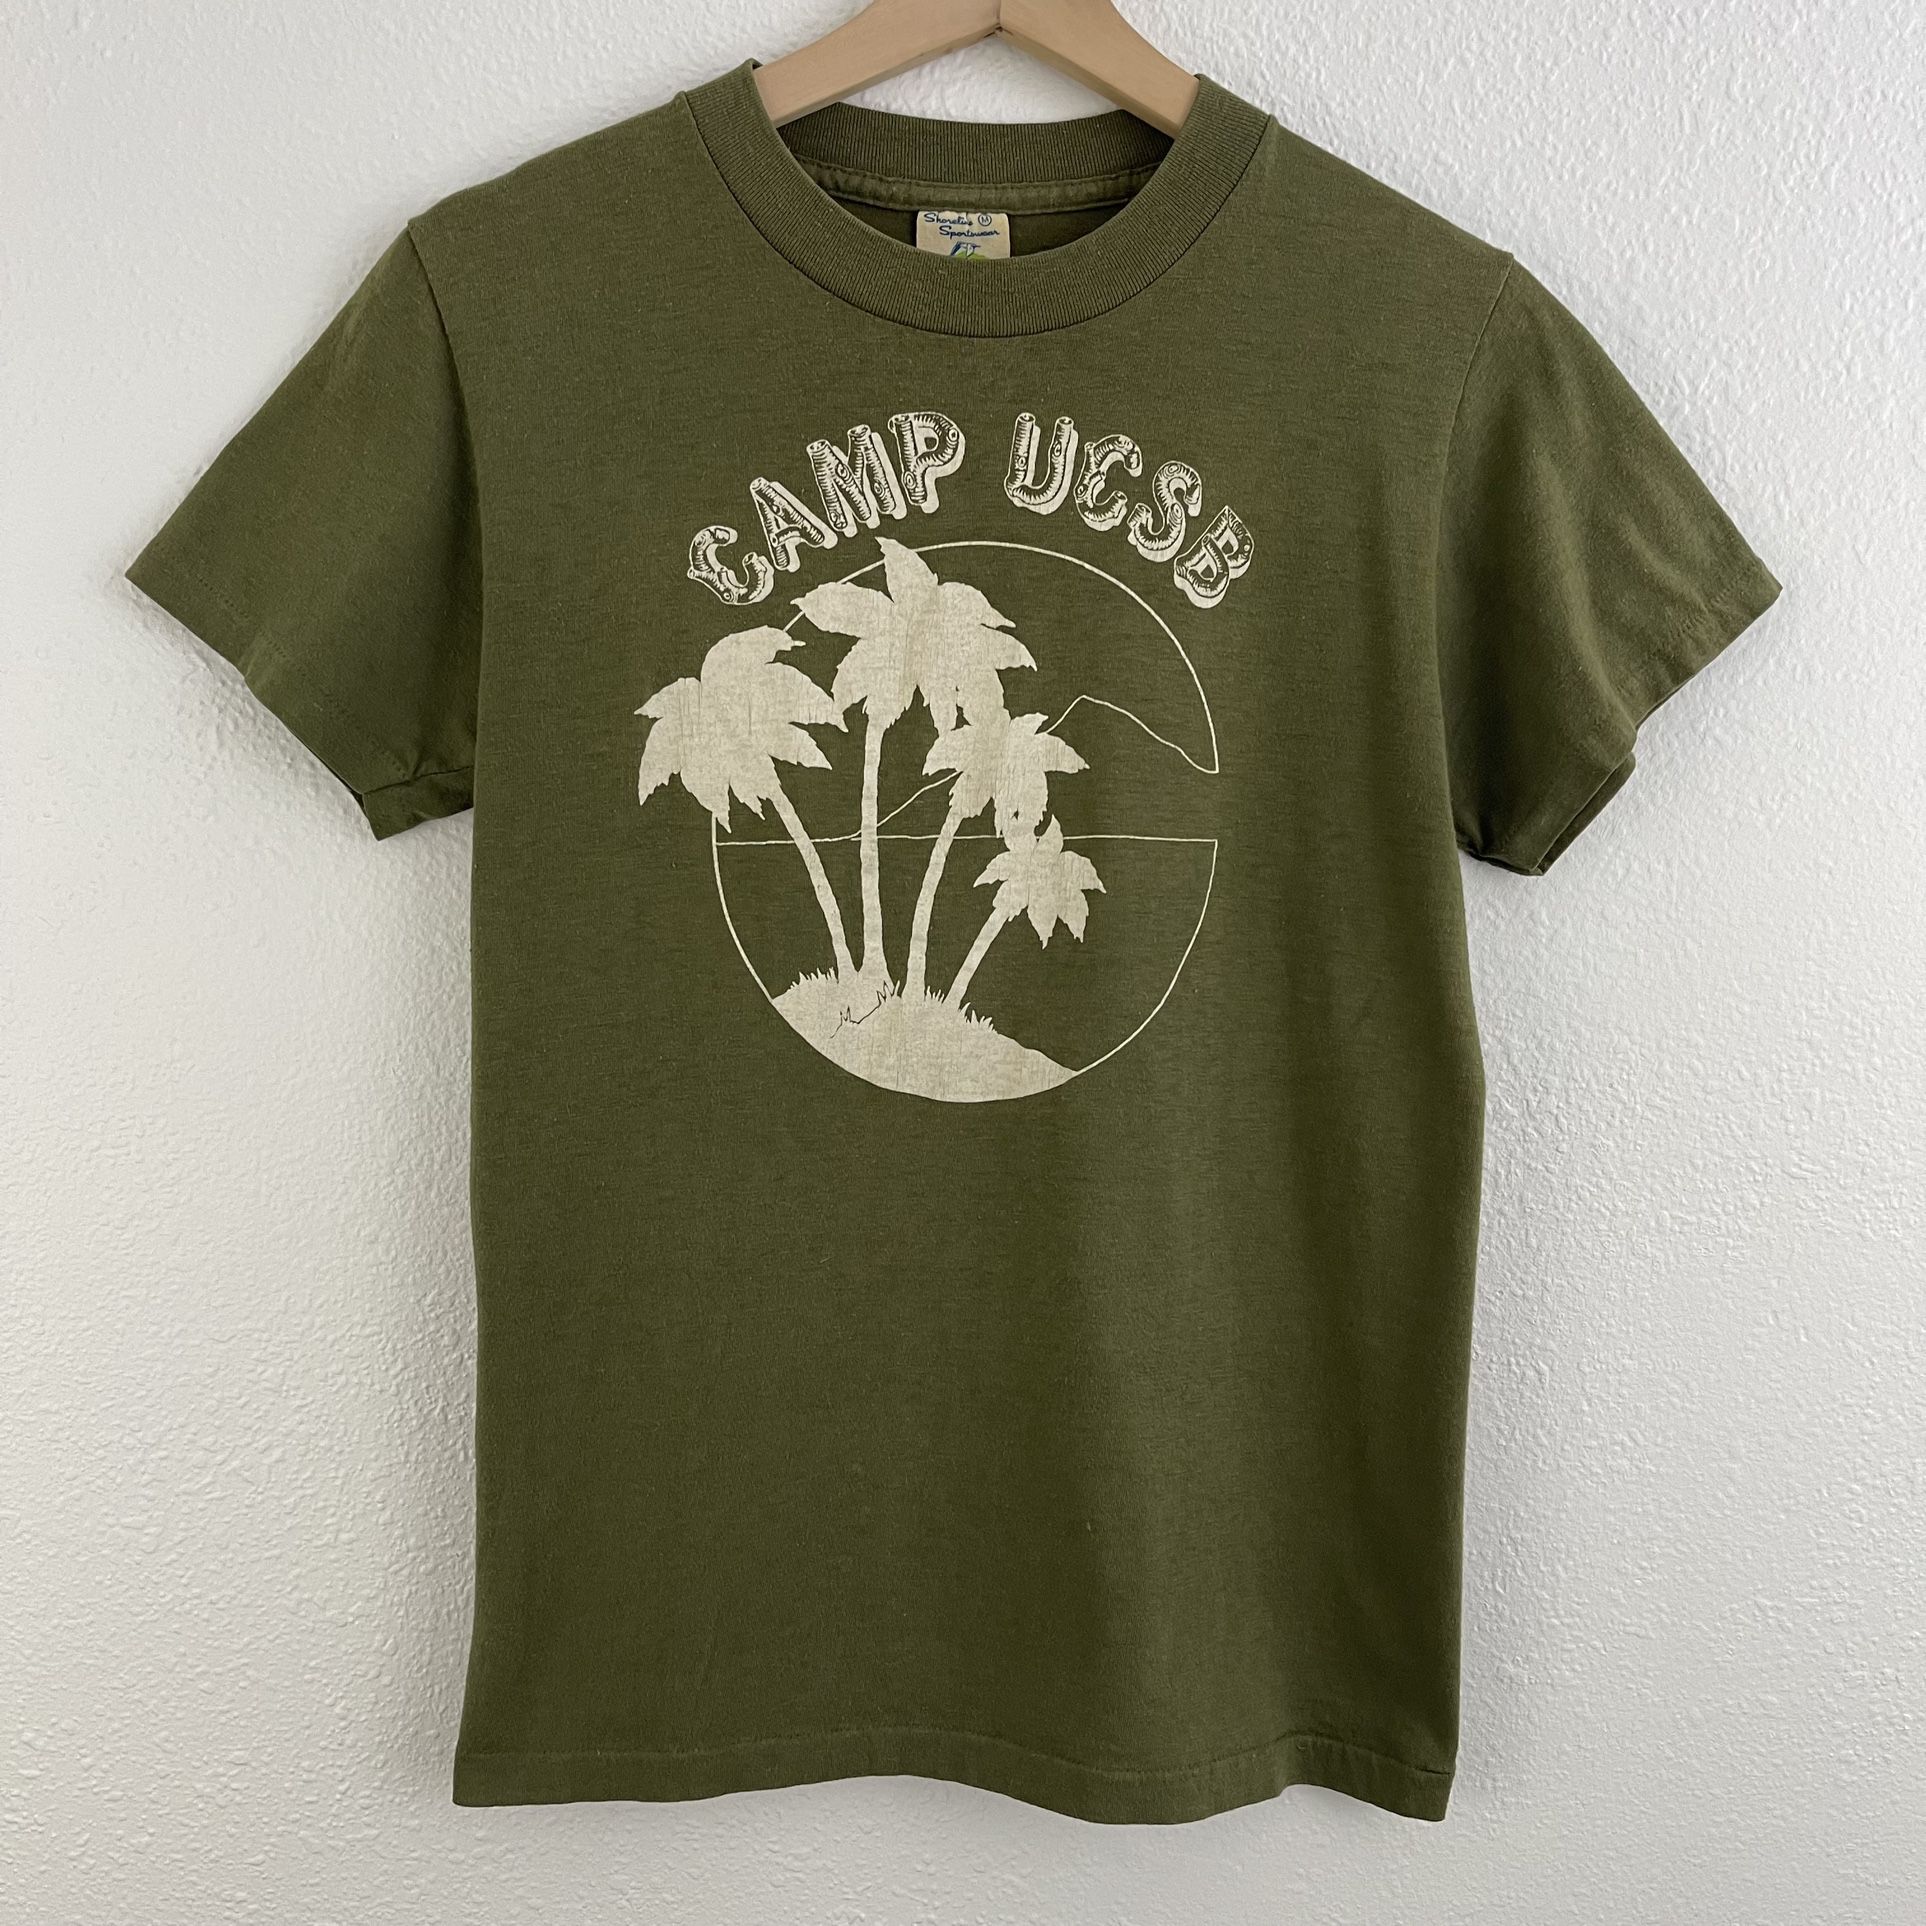 Vintage 90s Olive Green Camp UCSB Casual Single Stitch Short Sleeve Graphic Tee